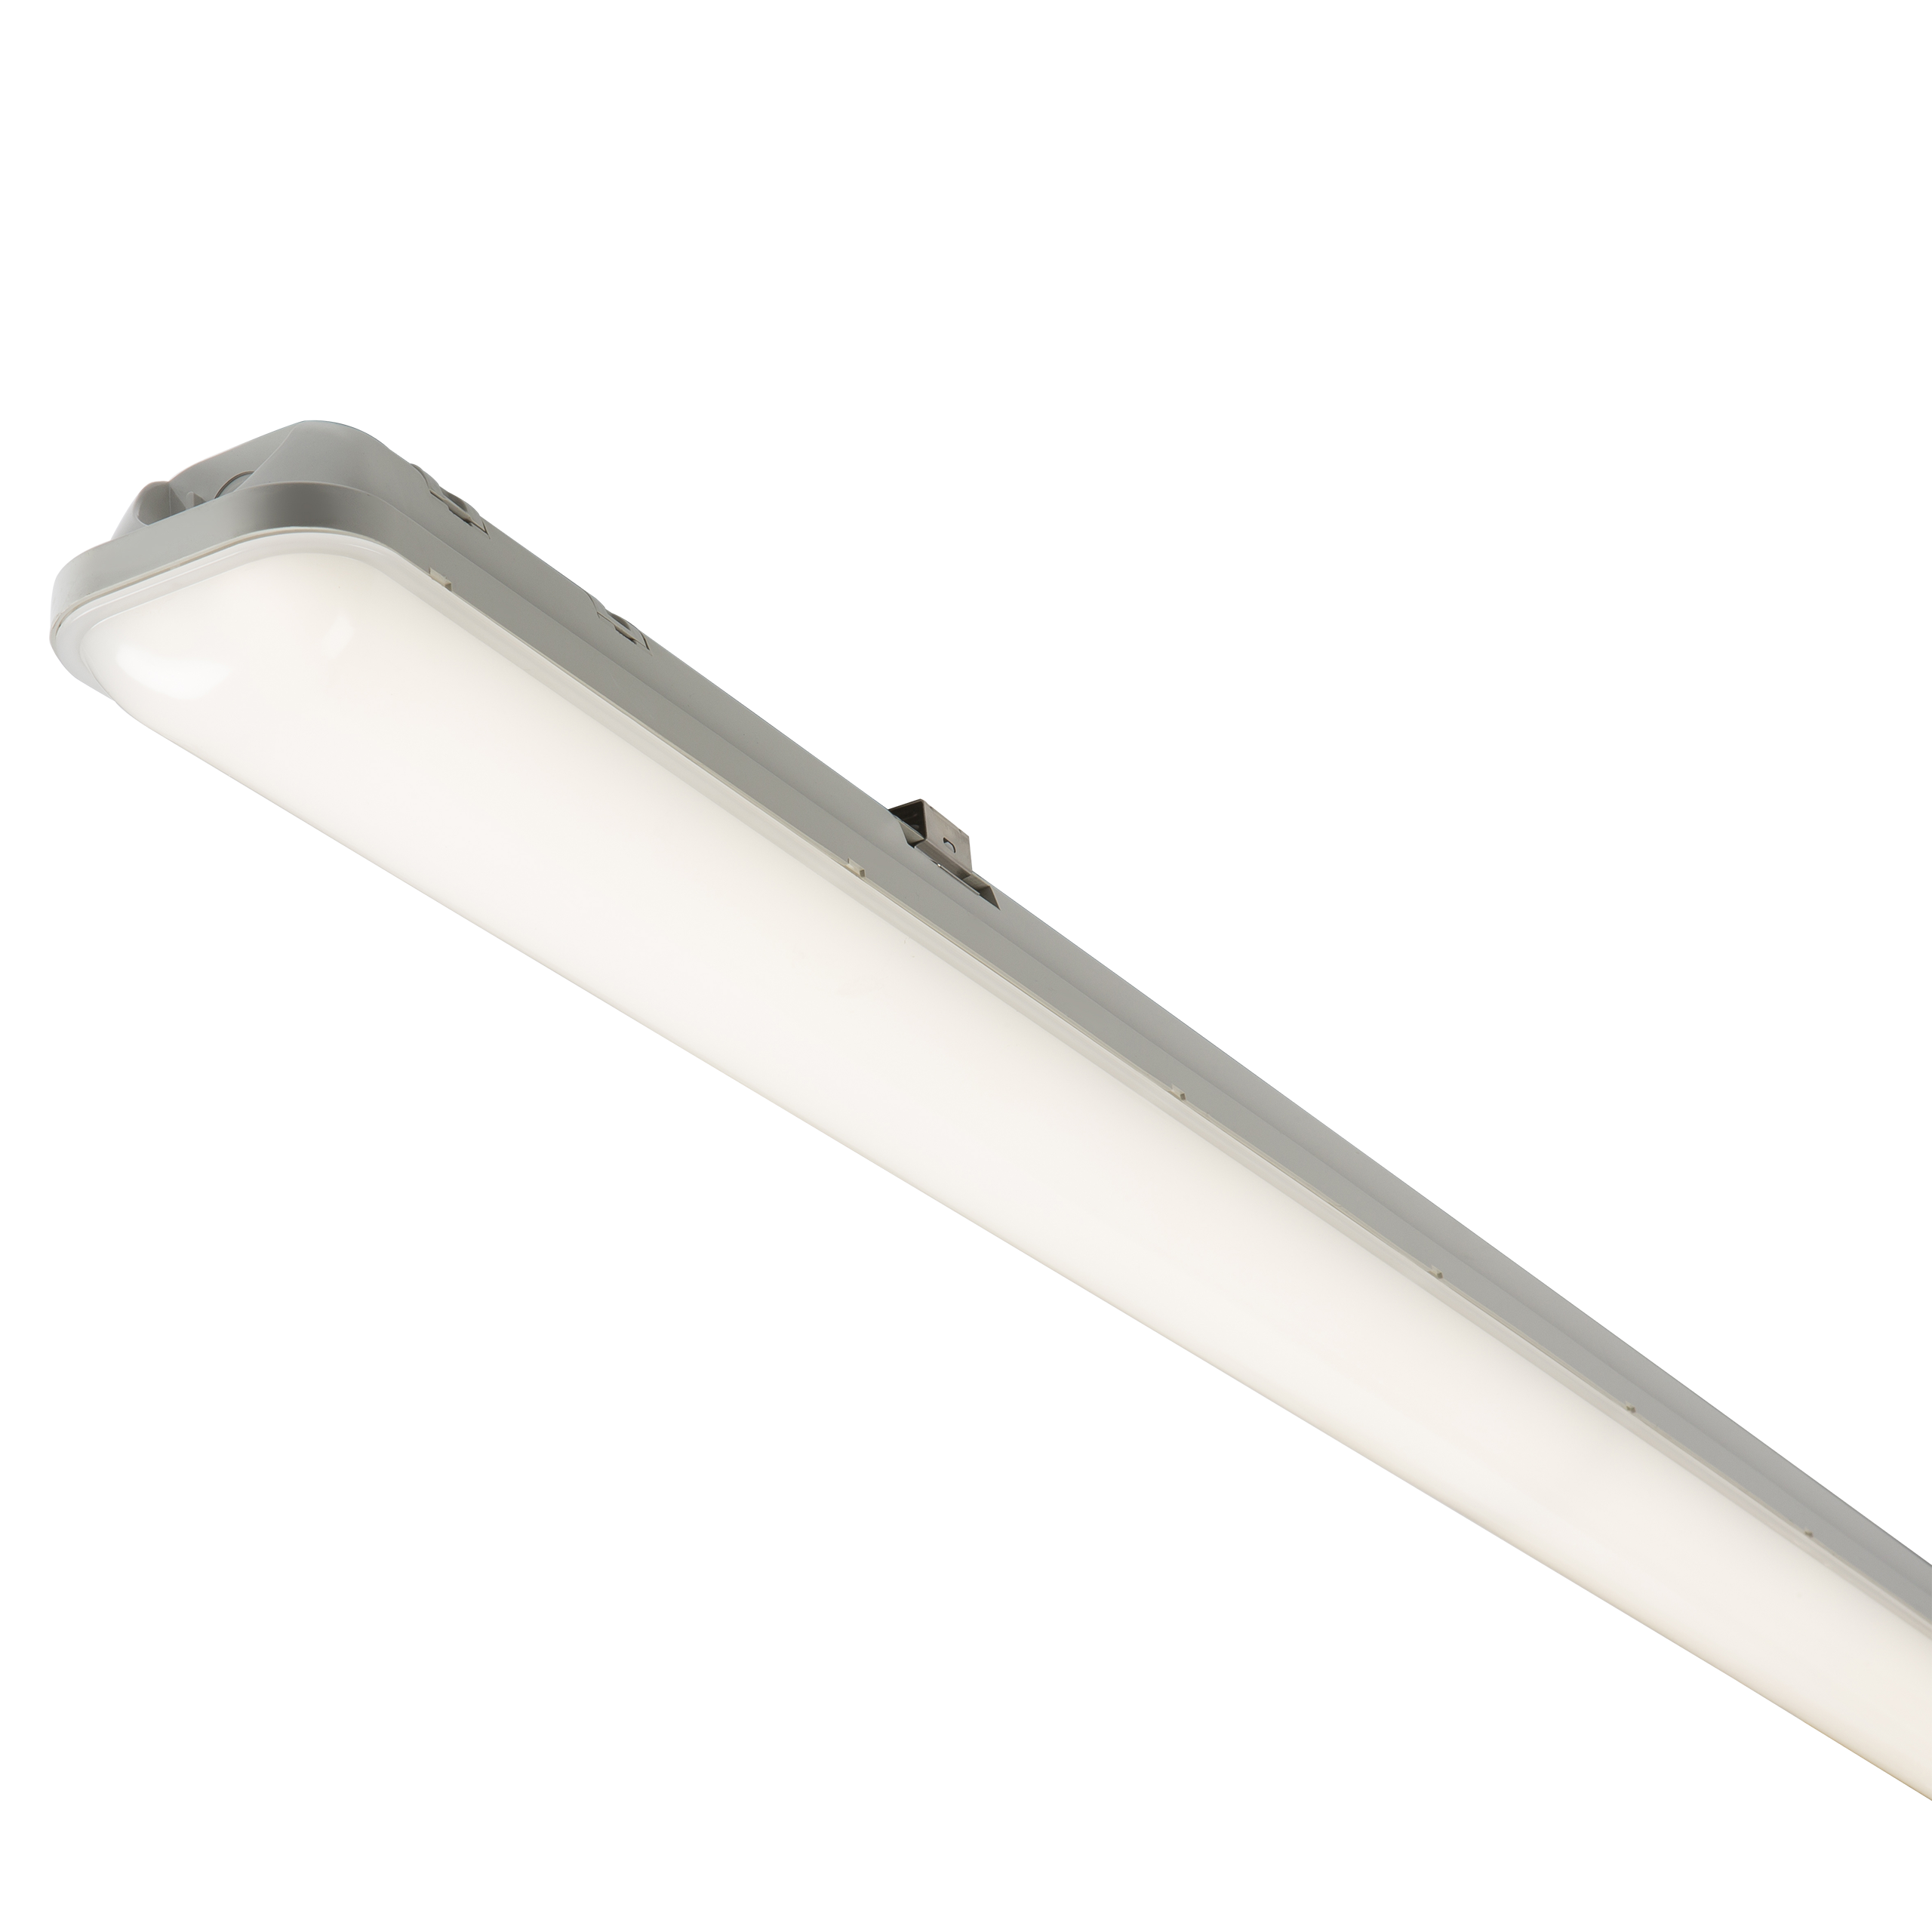 230V IP65 5ft 48W LED Non-Corrosive Fitting With Microwave Sensor - 1480mm - NCLED48S 